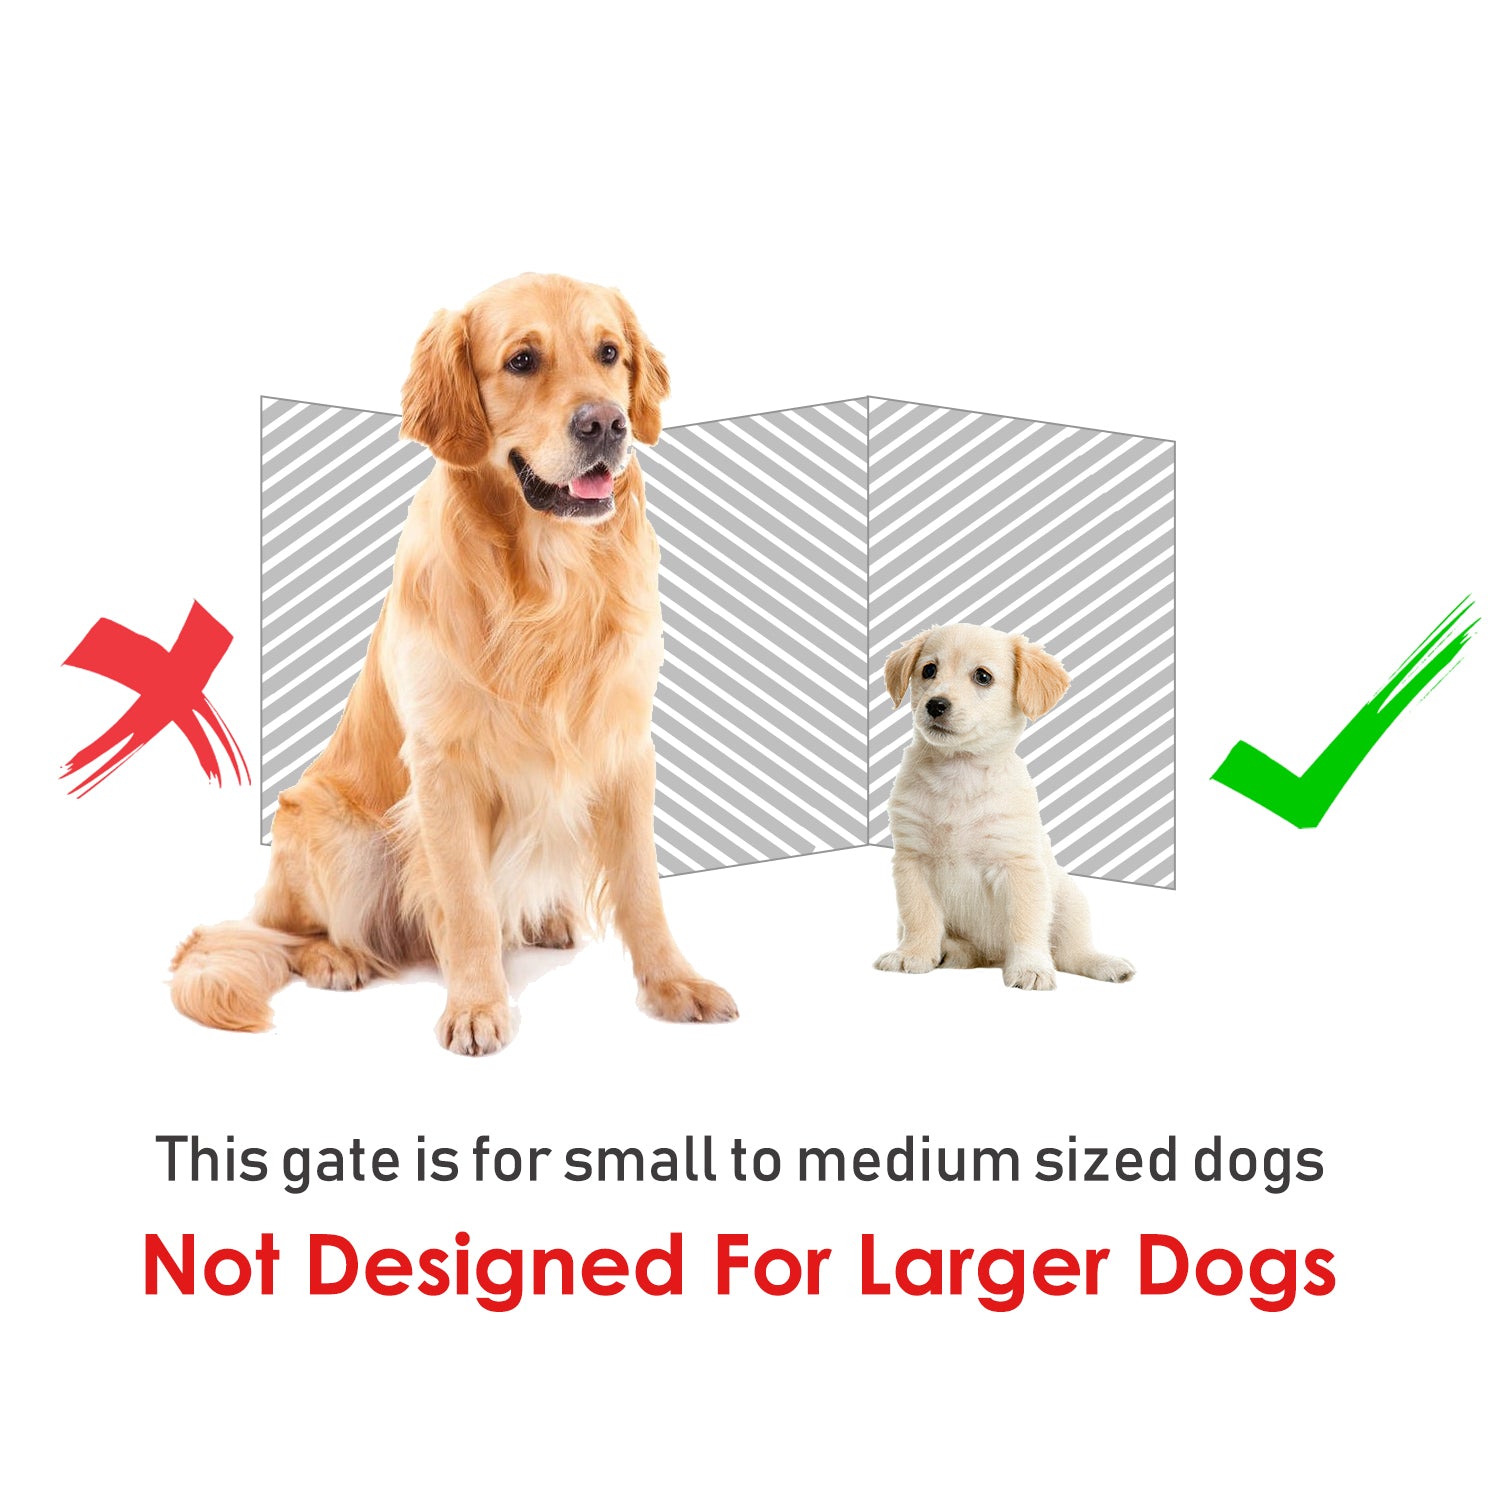 MDF Freestanding Expandable Pet Gate w/ Latched Door Brown